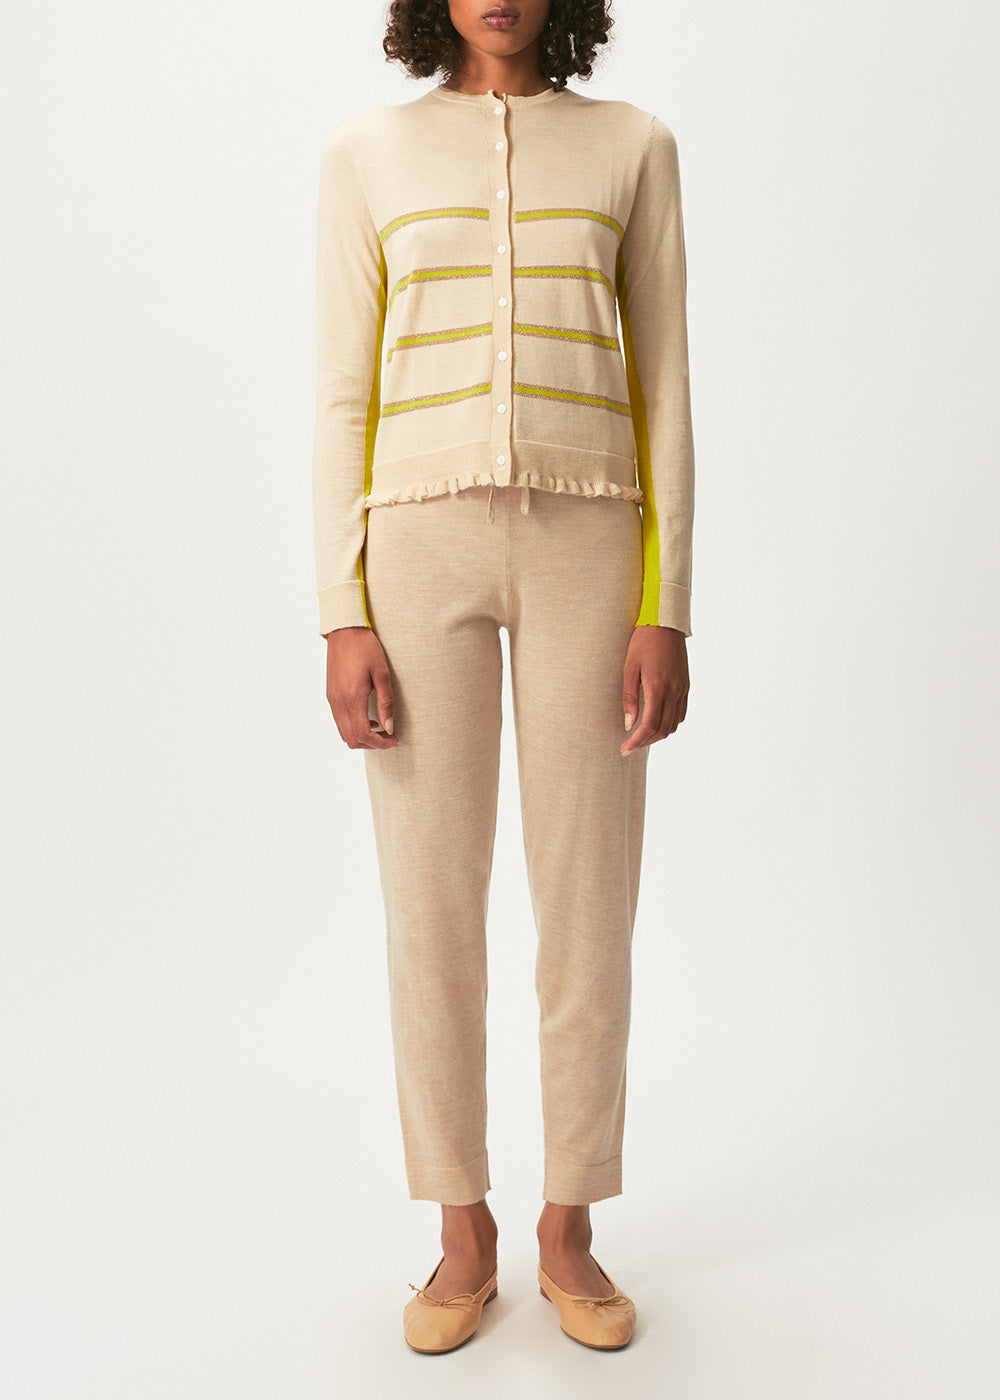 Capucine Cropped Cardigan - Small / CANVAS WITH CITRUS STRIPES AND GOLD LUREX